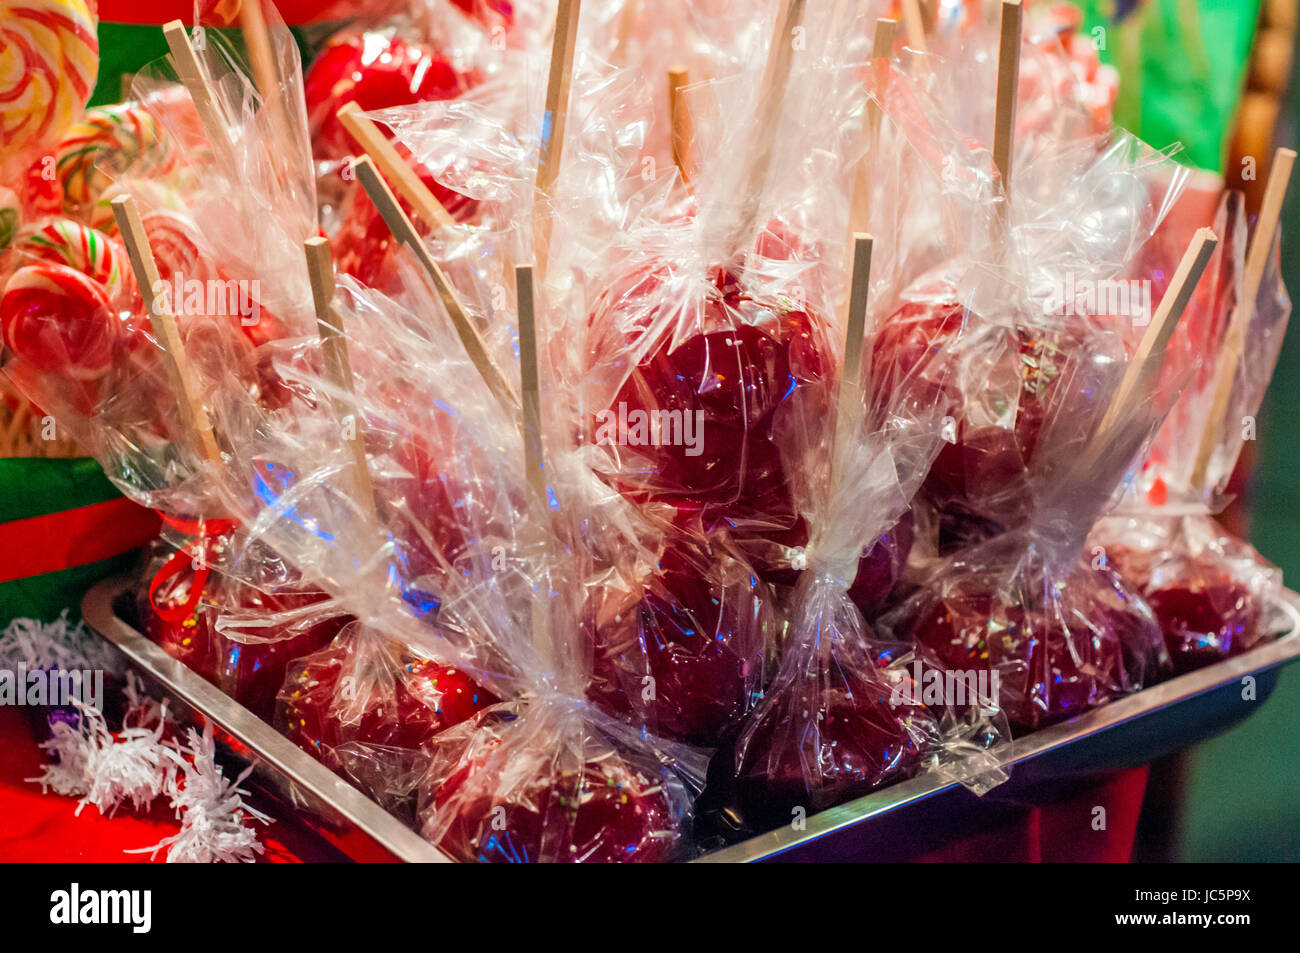 Sweet glazed red toffee candy apples on sticks for sale on farmer market or country fair. Delicious red candy apples covered with colorful sprinkles.  Stock Photo